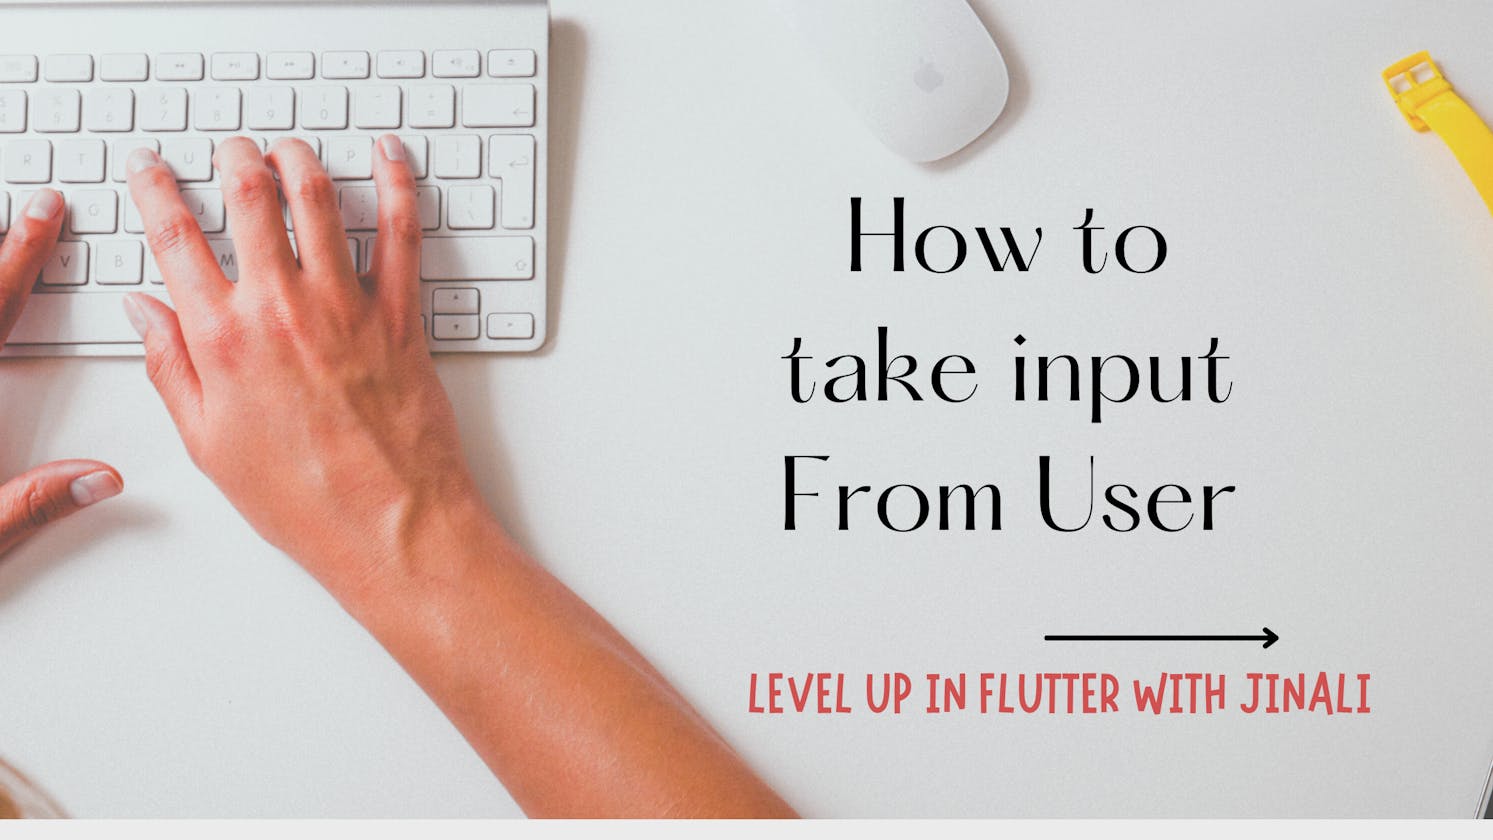 How to take input from user: